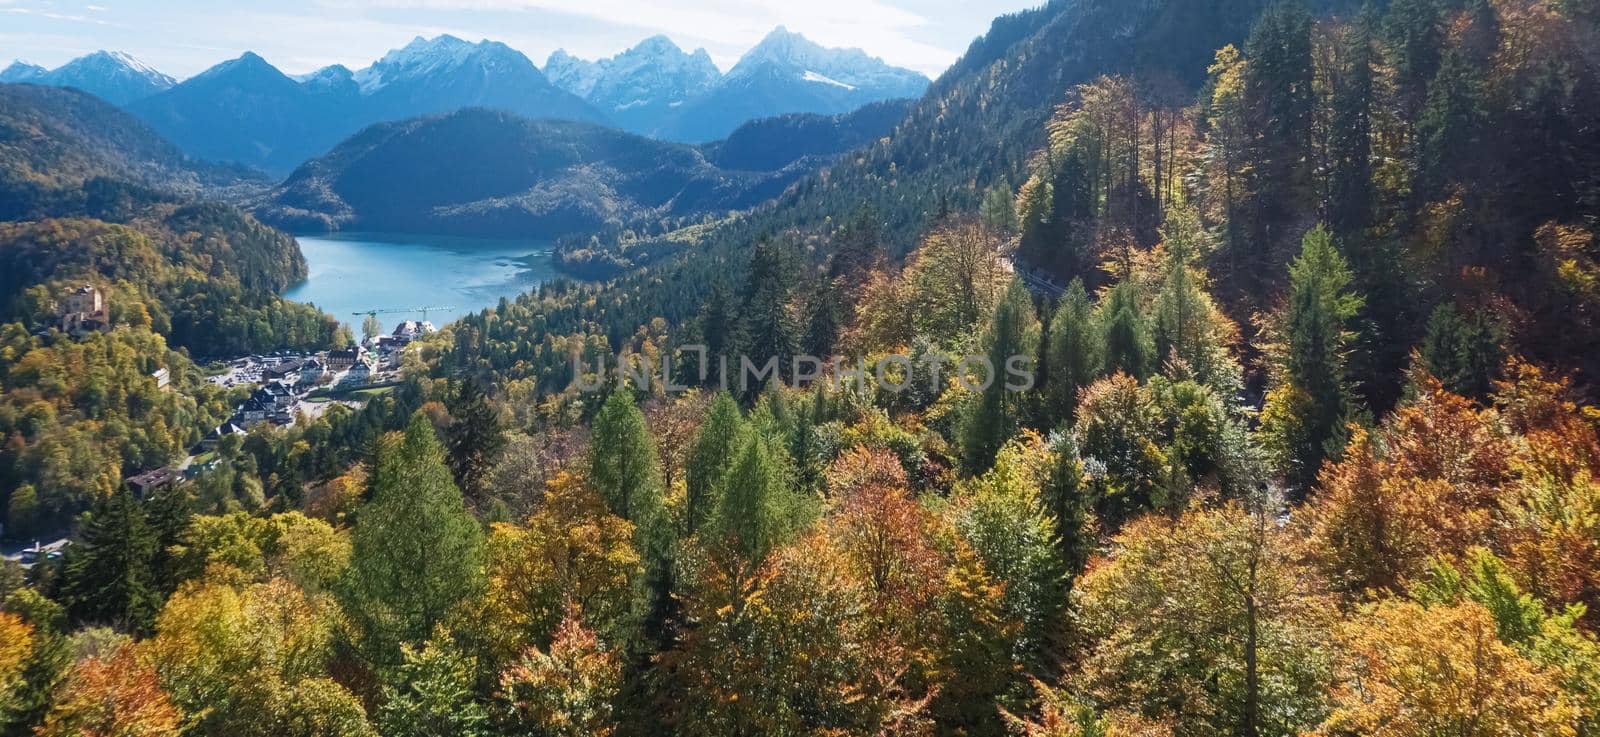 Beautiful nature of European Alps, landscape view of alpine mountains, lake and village on a sunny day, travel and destination scenery